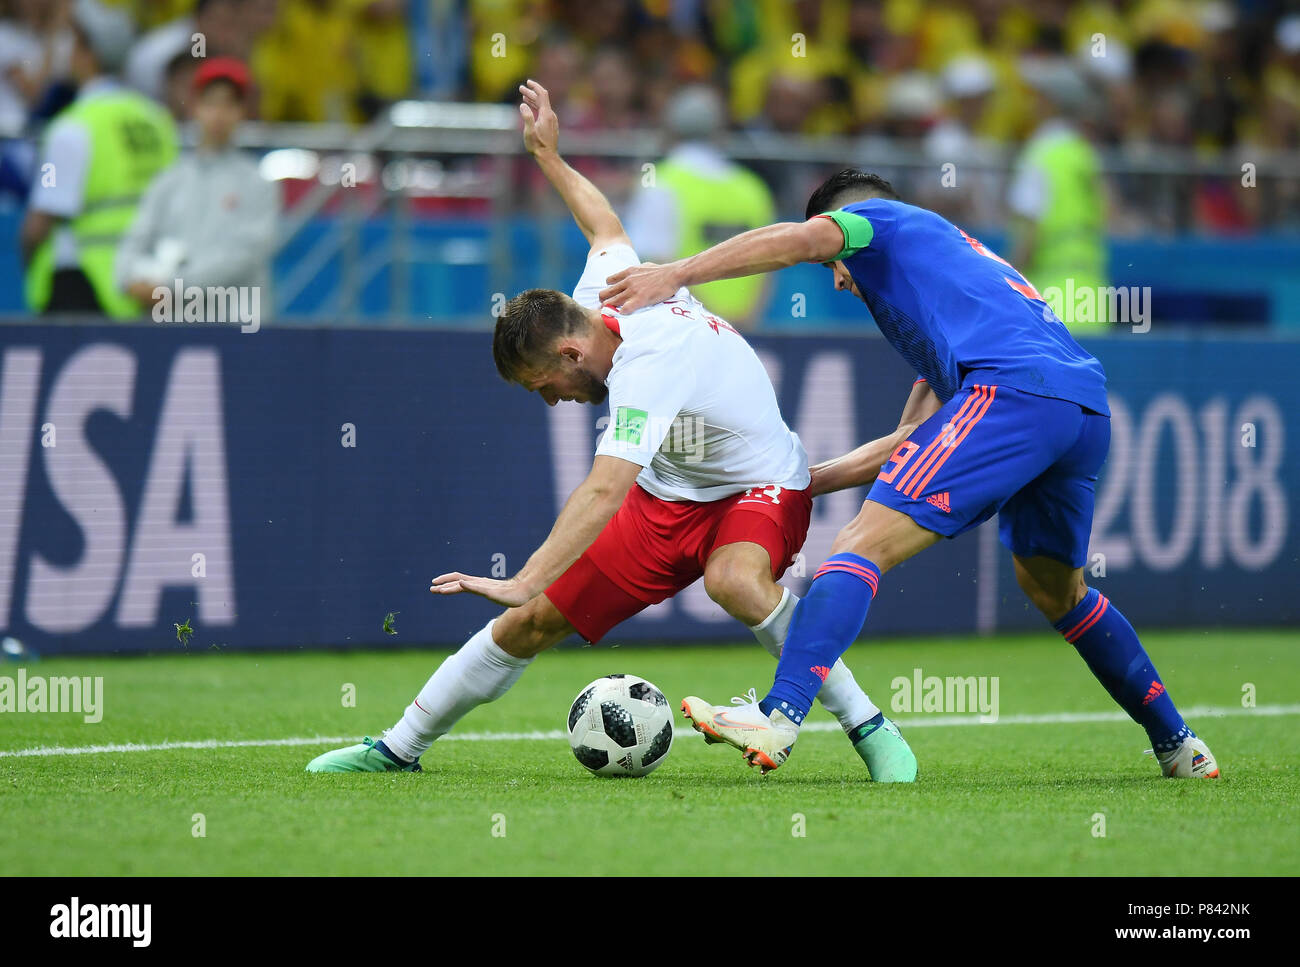 KAZAN, RUSSIA - JUNE 24: James Rodriguez of Colombia competes with Maciej Rybus of Poland during the 2018 FIFA World Cup Russia group H match between Poland and Colombia at Kazan Arena on June 24, 2018 in Kazan, Russia. (Photo by Lukasz Laskowski/PressFocus/MB Media) Stock Photo